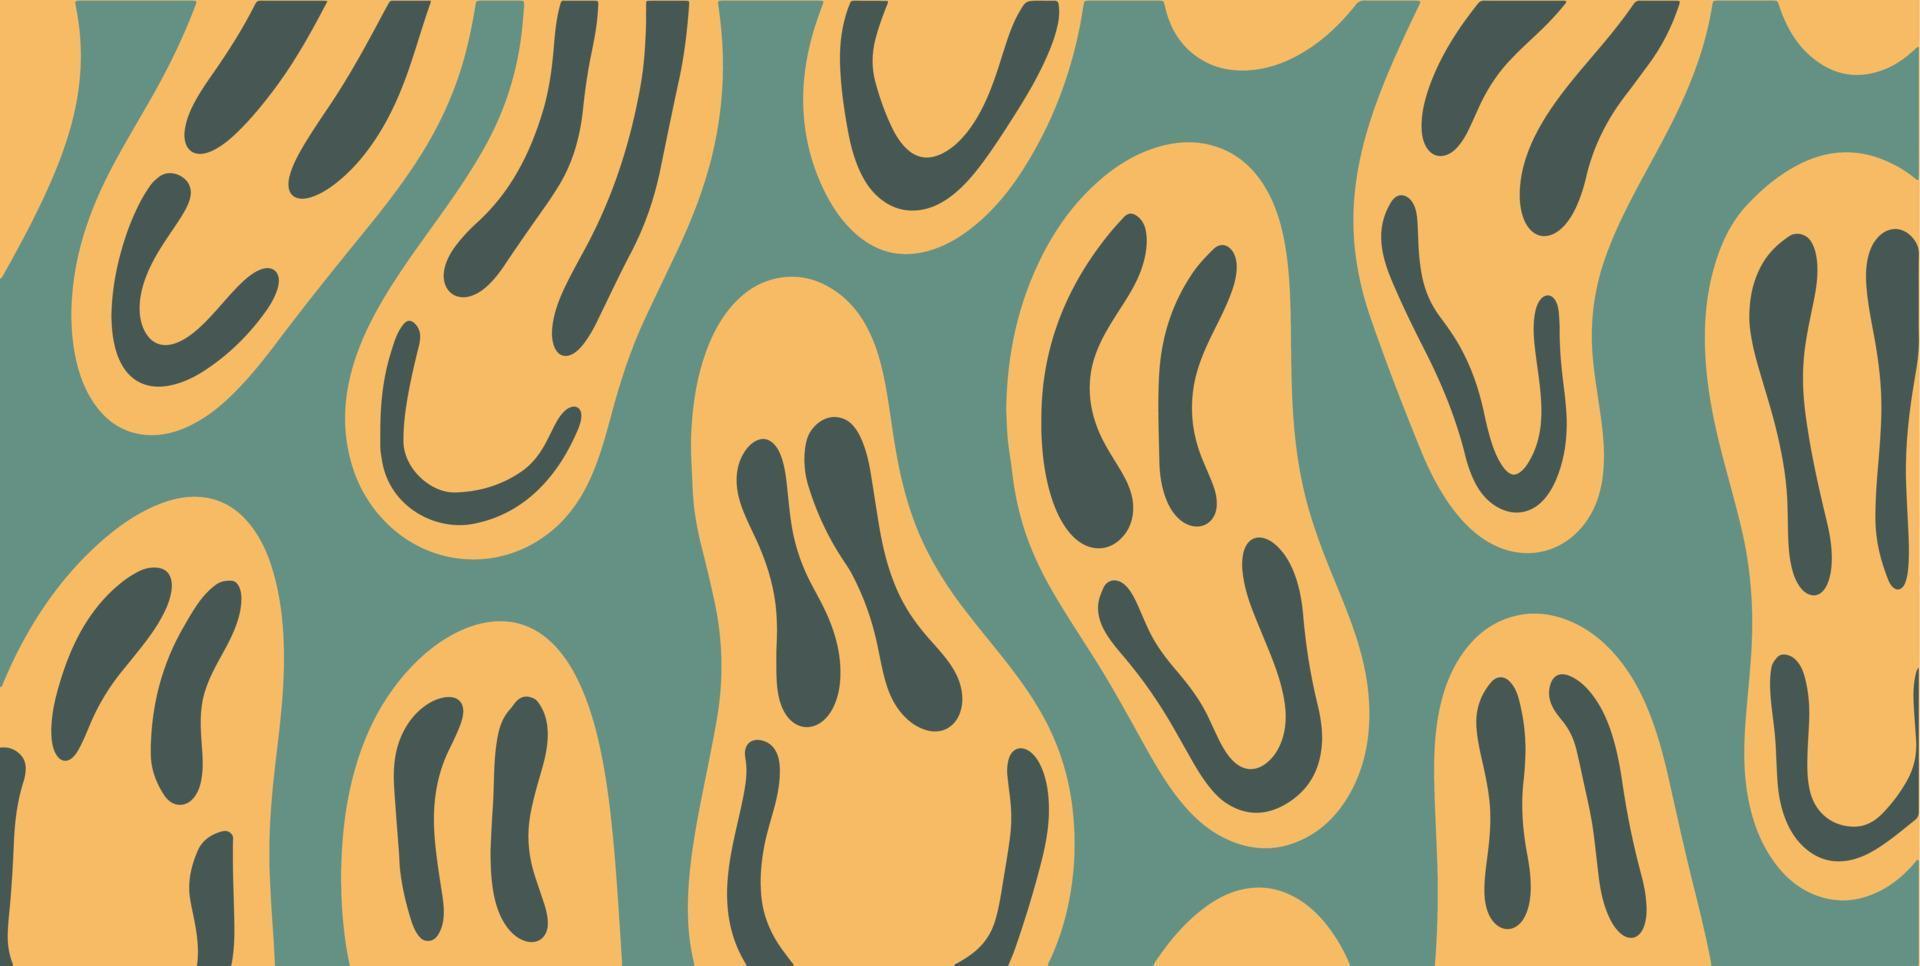 A graphic of yellow bacteria on a green background - 60s, smile, 70s, psychedelic